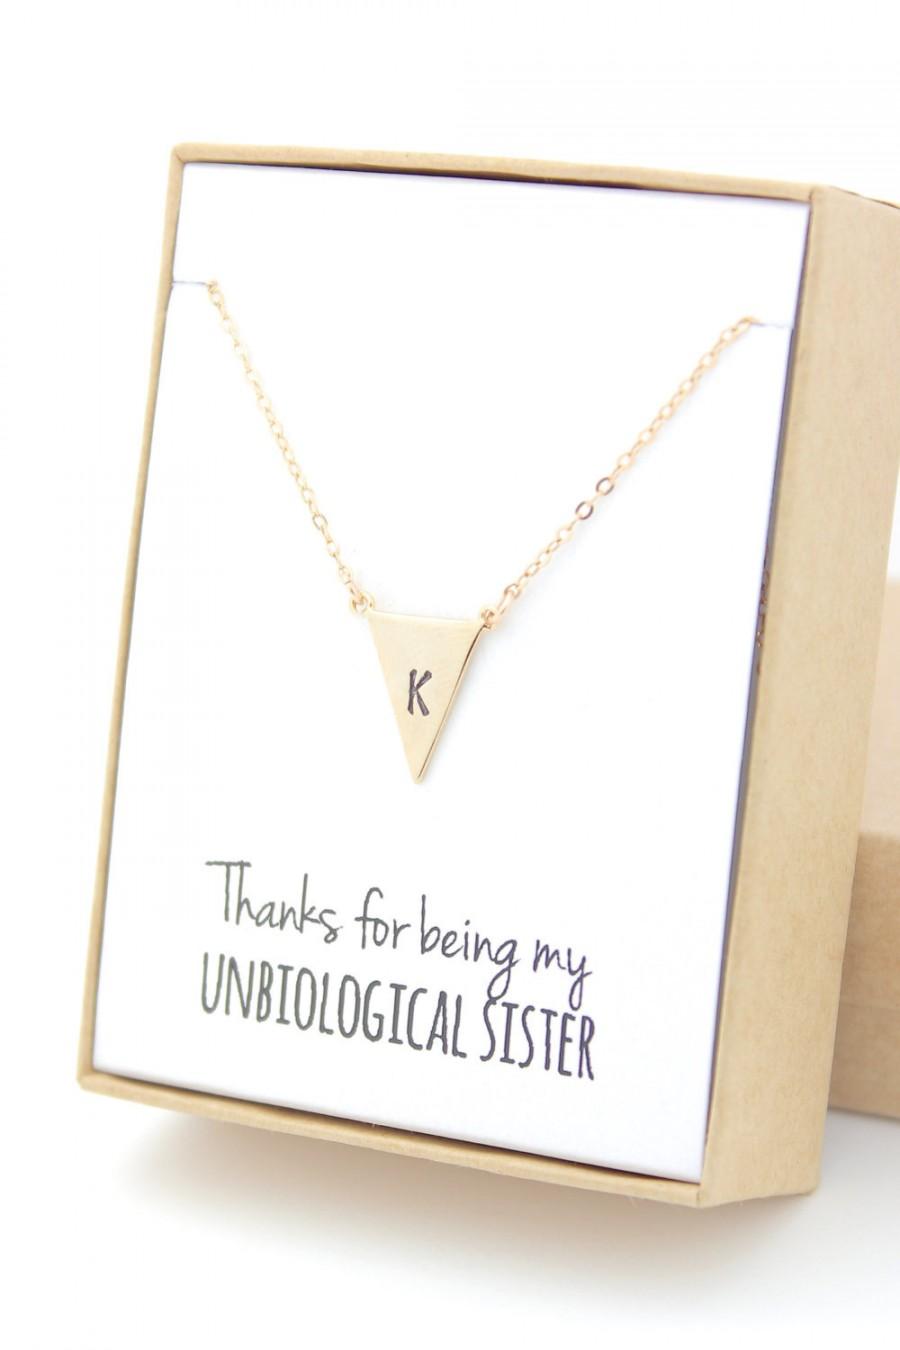 Wedding - Gold Triangle Letter Necklace - Bridesmaid Gift Jewelry - Unbiological Sister - Personalized Necklace - Initial Letter - Larger Triangle